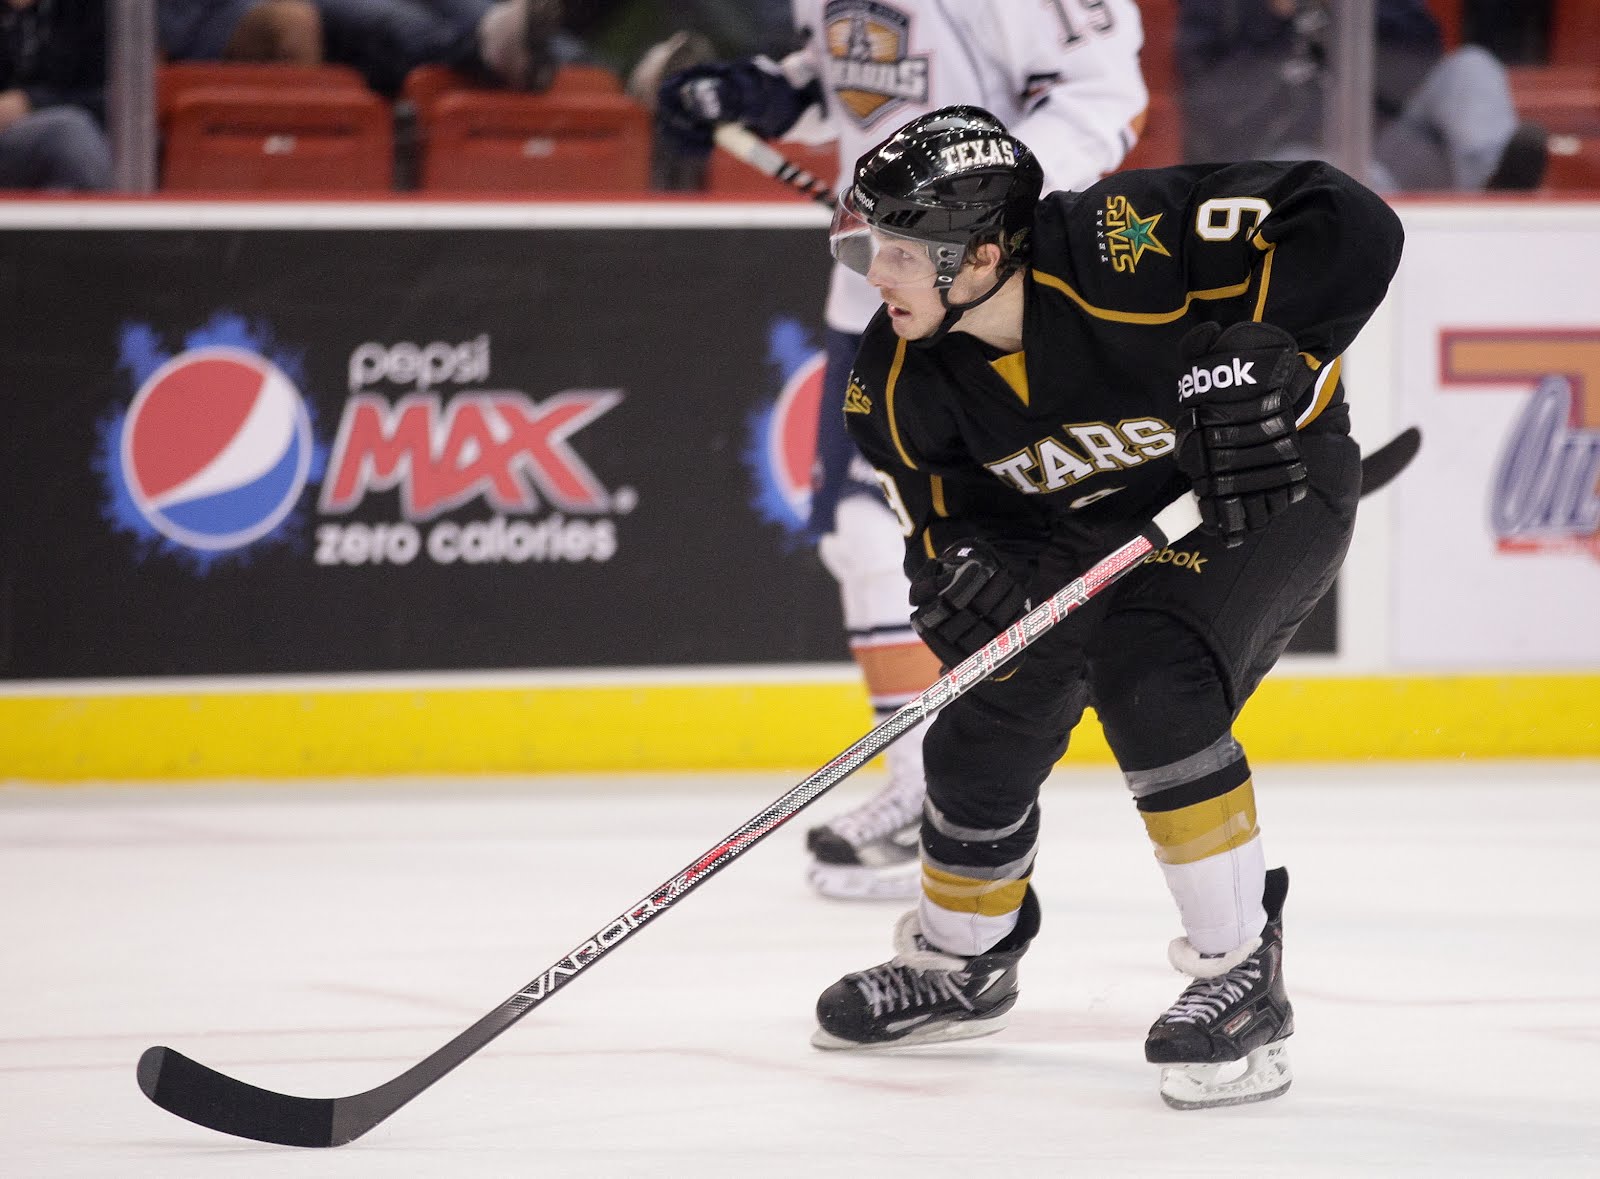 Dallas Stars: The Growth of Youth Hockey in Texas